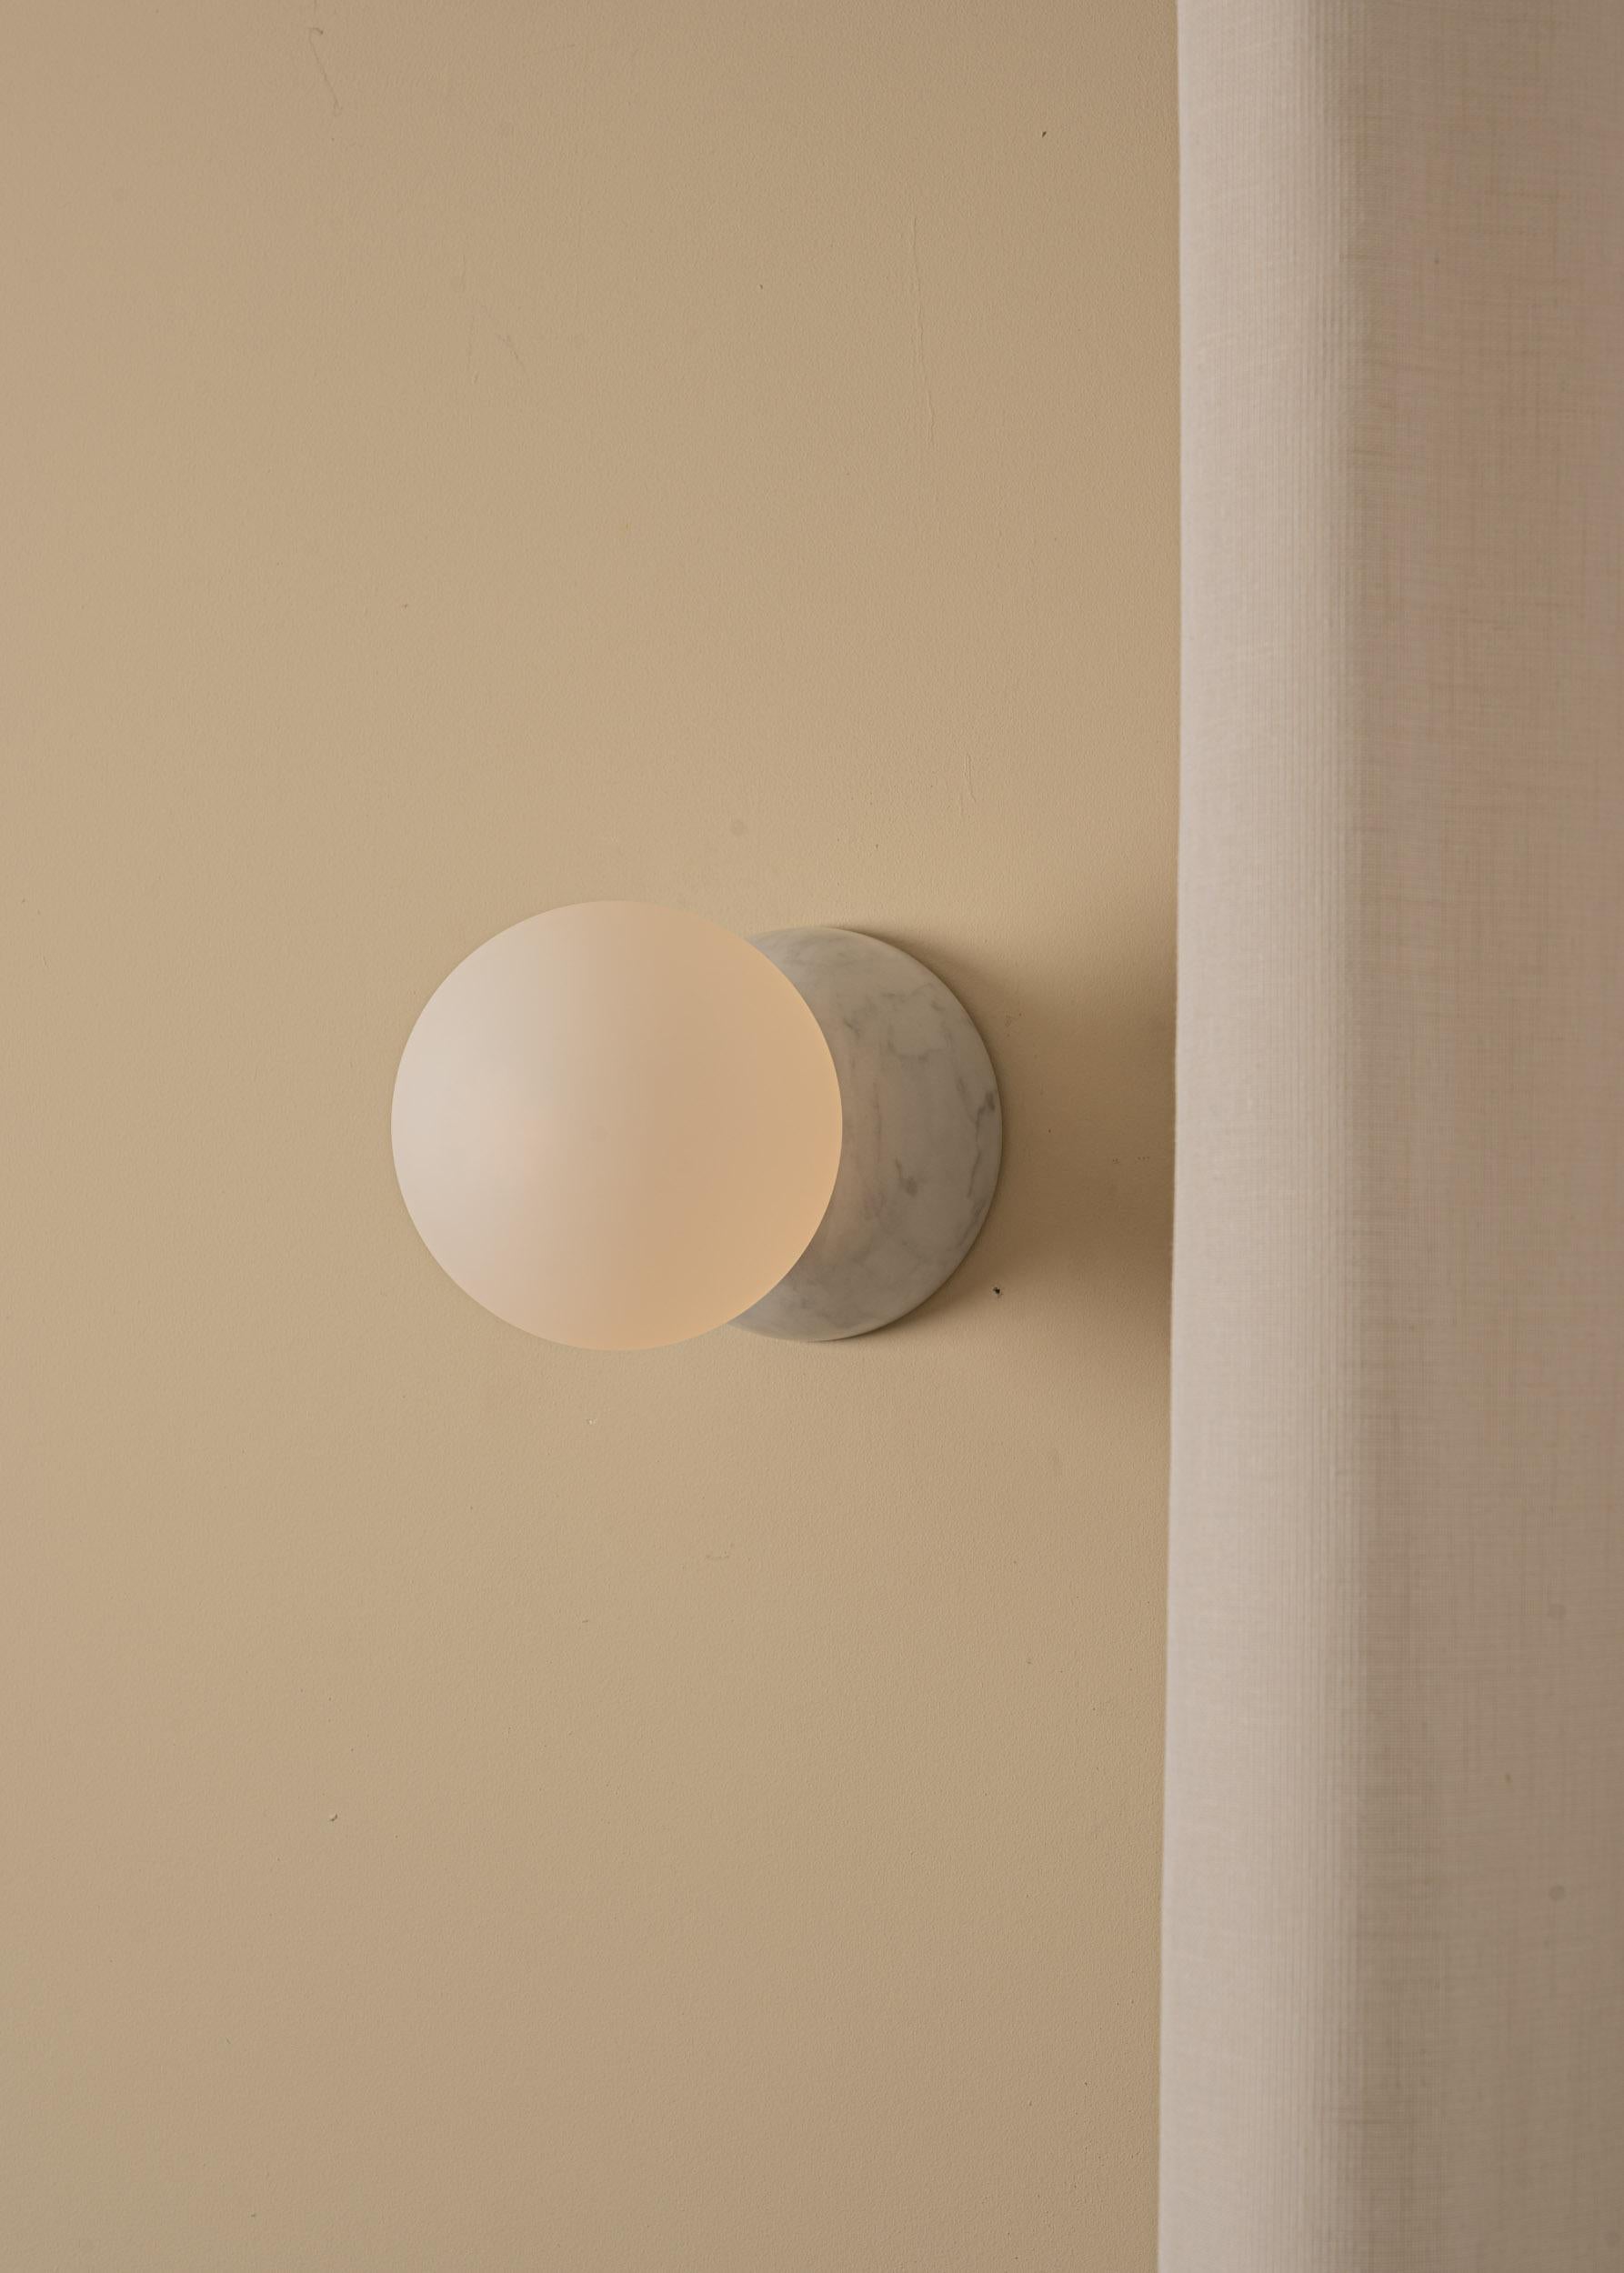 Eklipso White Marble Wall Sconce by Simone & Marcel
Dimensions: D 19,5 x W 14 x H 14 cm.
Materials: White marble and glass.

Available in different marble, brass, steel and alabaster options and finishes. Custom options available on request. Please